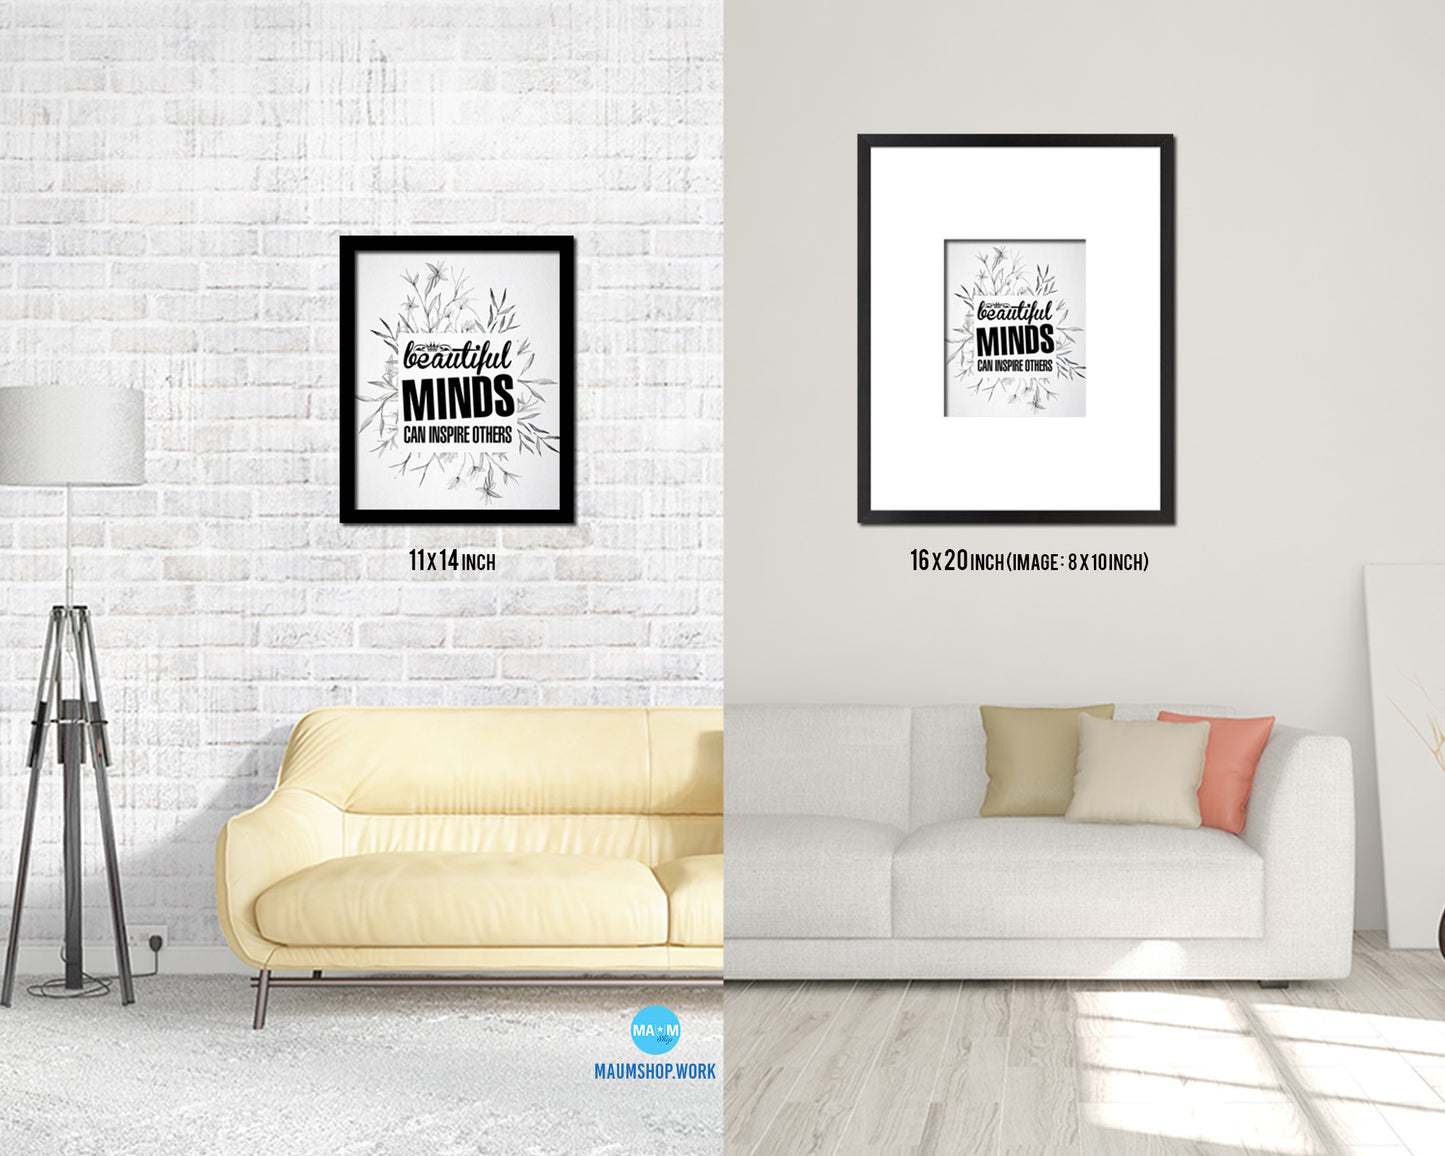 Beautiful minds can inspire others Quote Framed Print Wall Decor Art Gifts